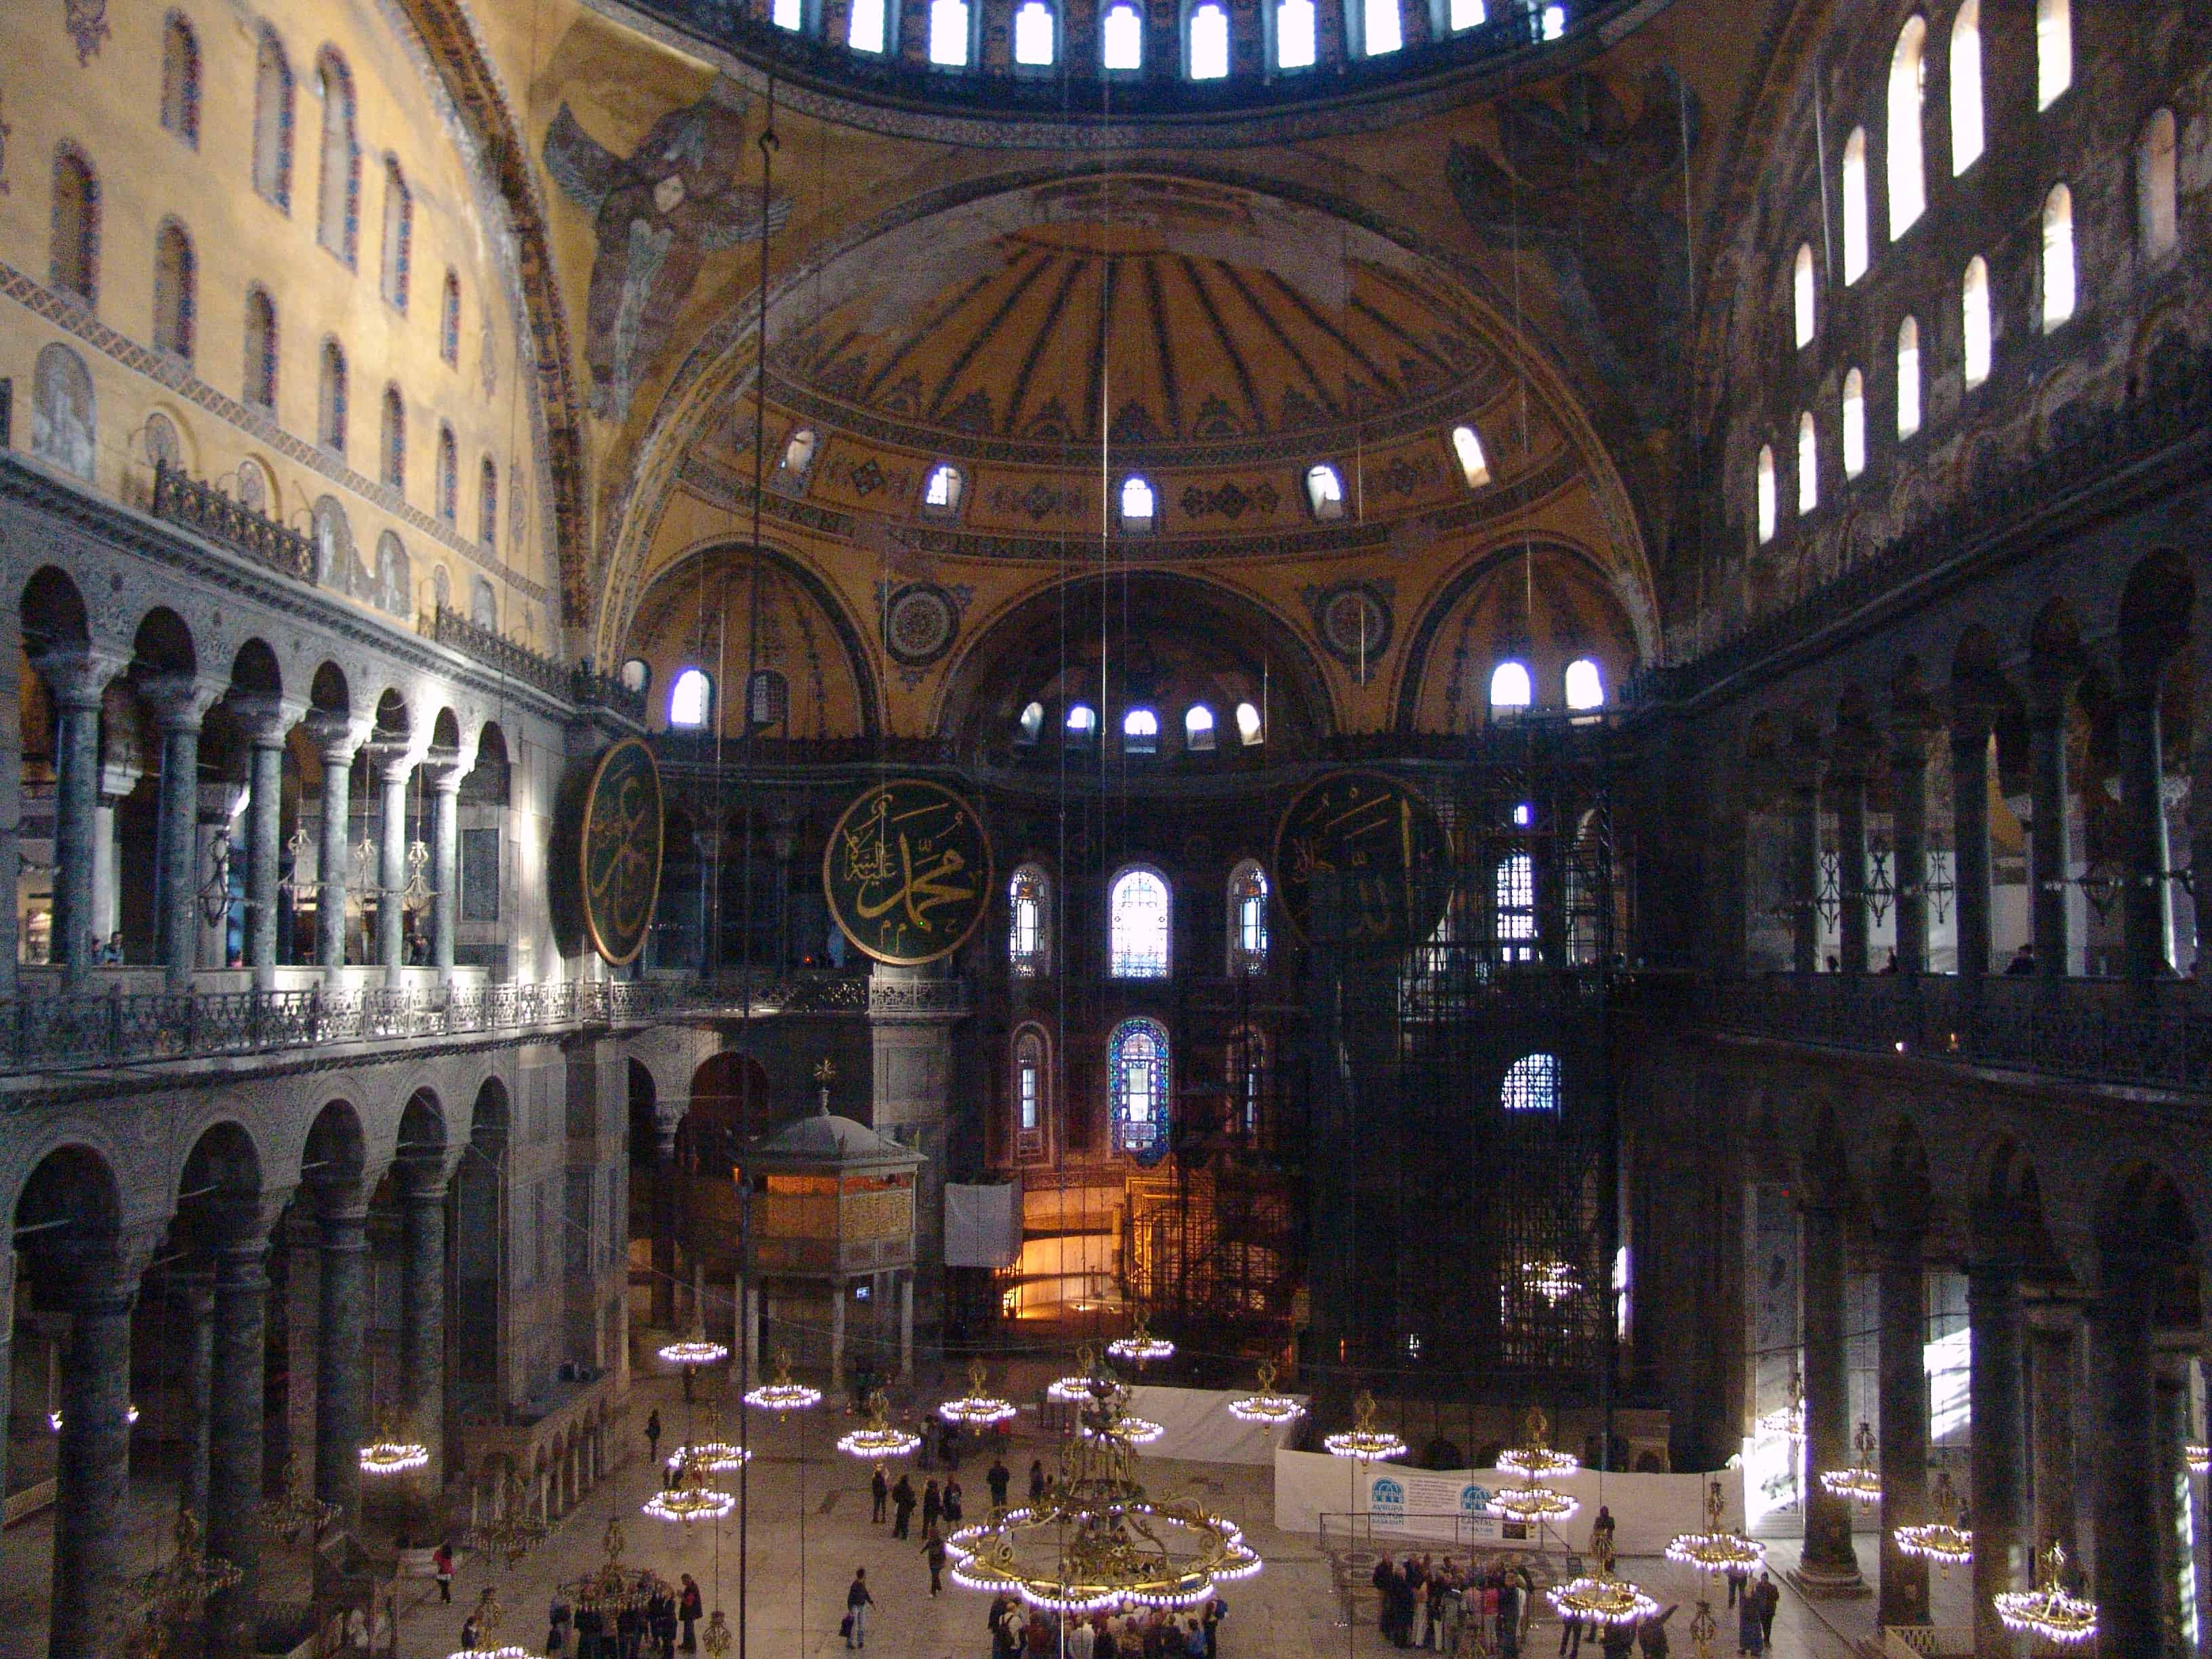 View from the Empress' Loge (with some scaffolding) at Hagia Sophia in Istanbul, Turkey